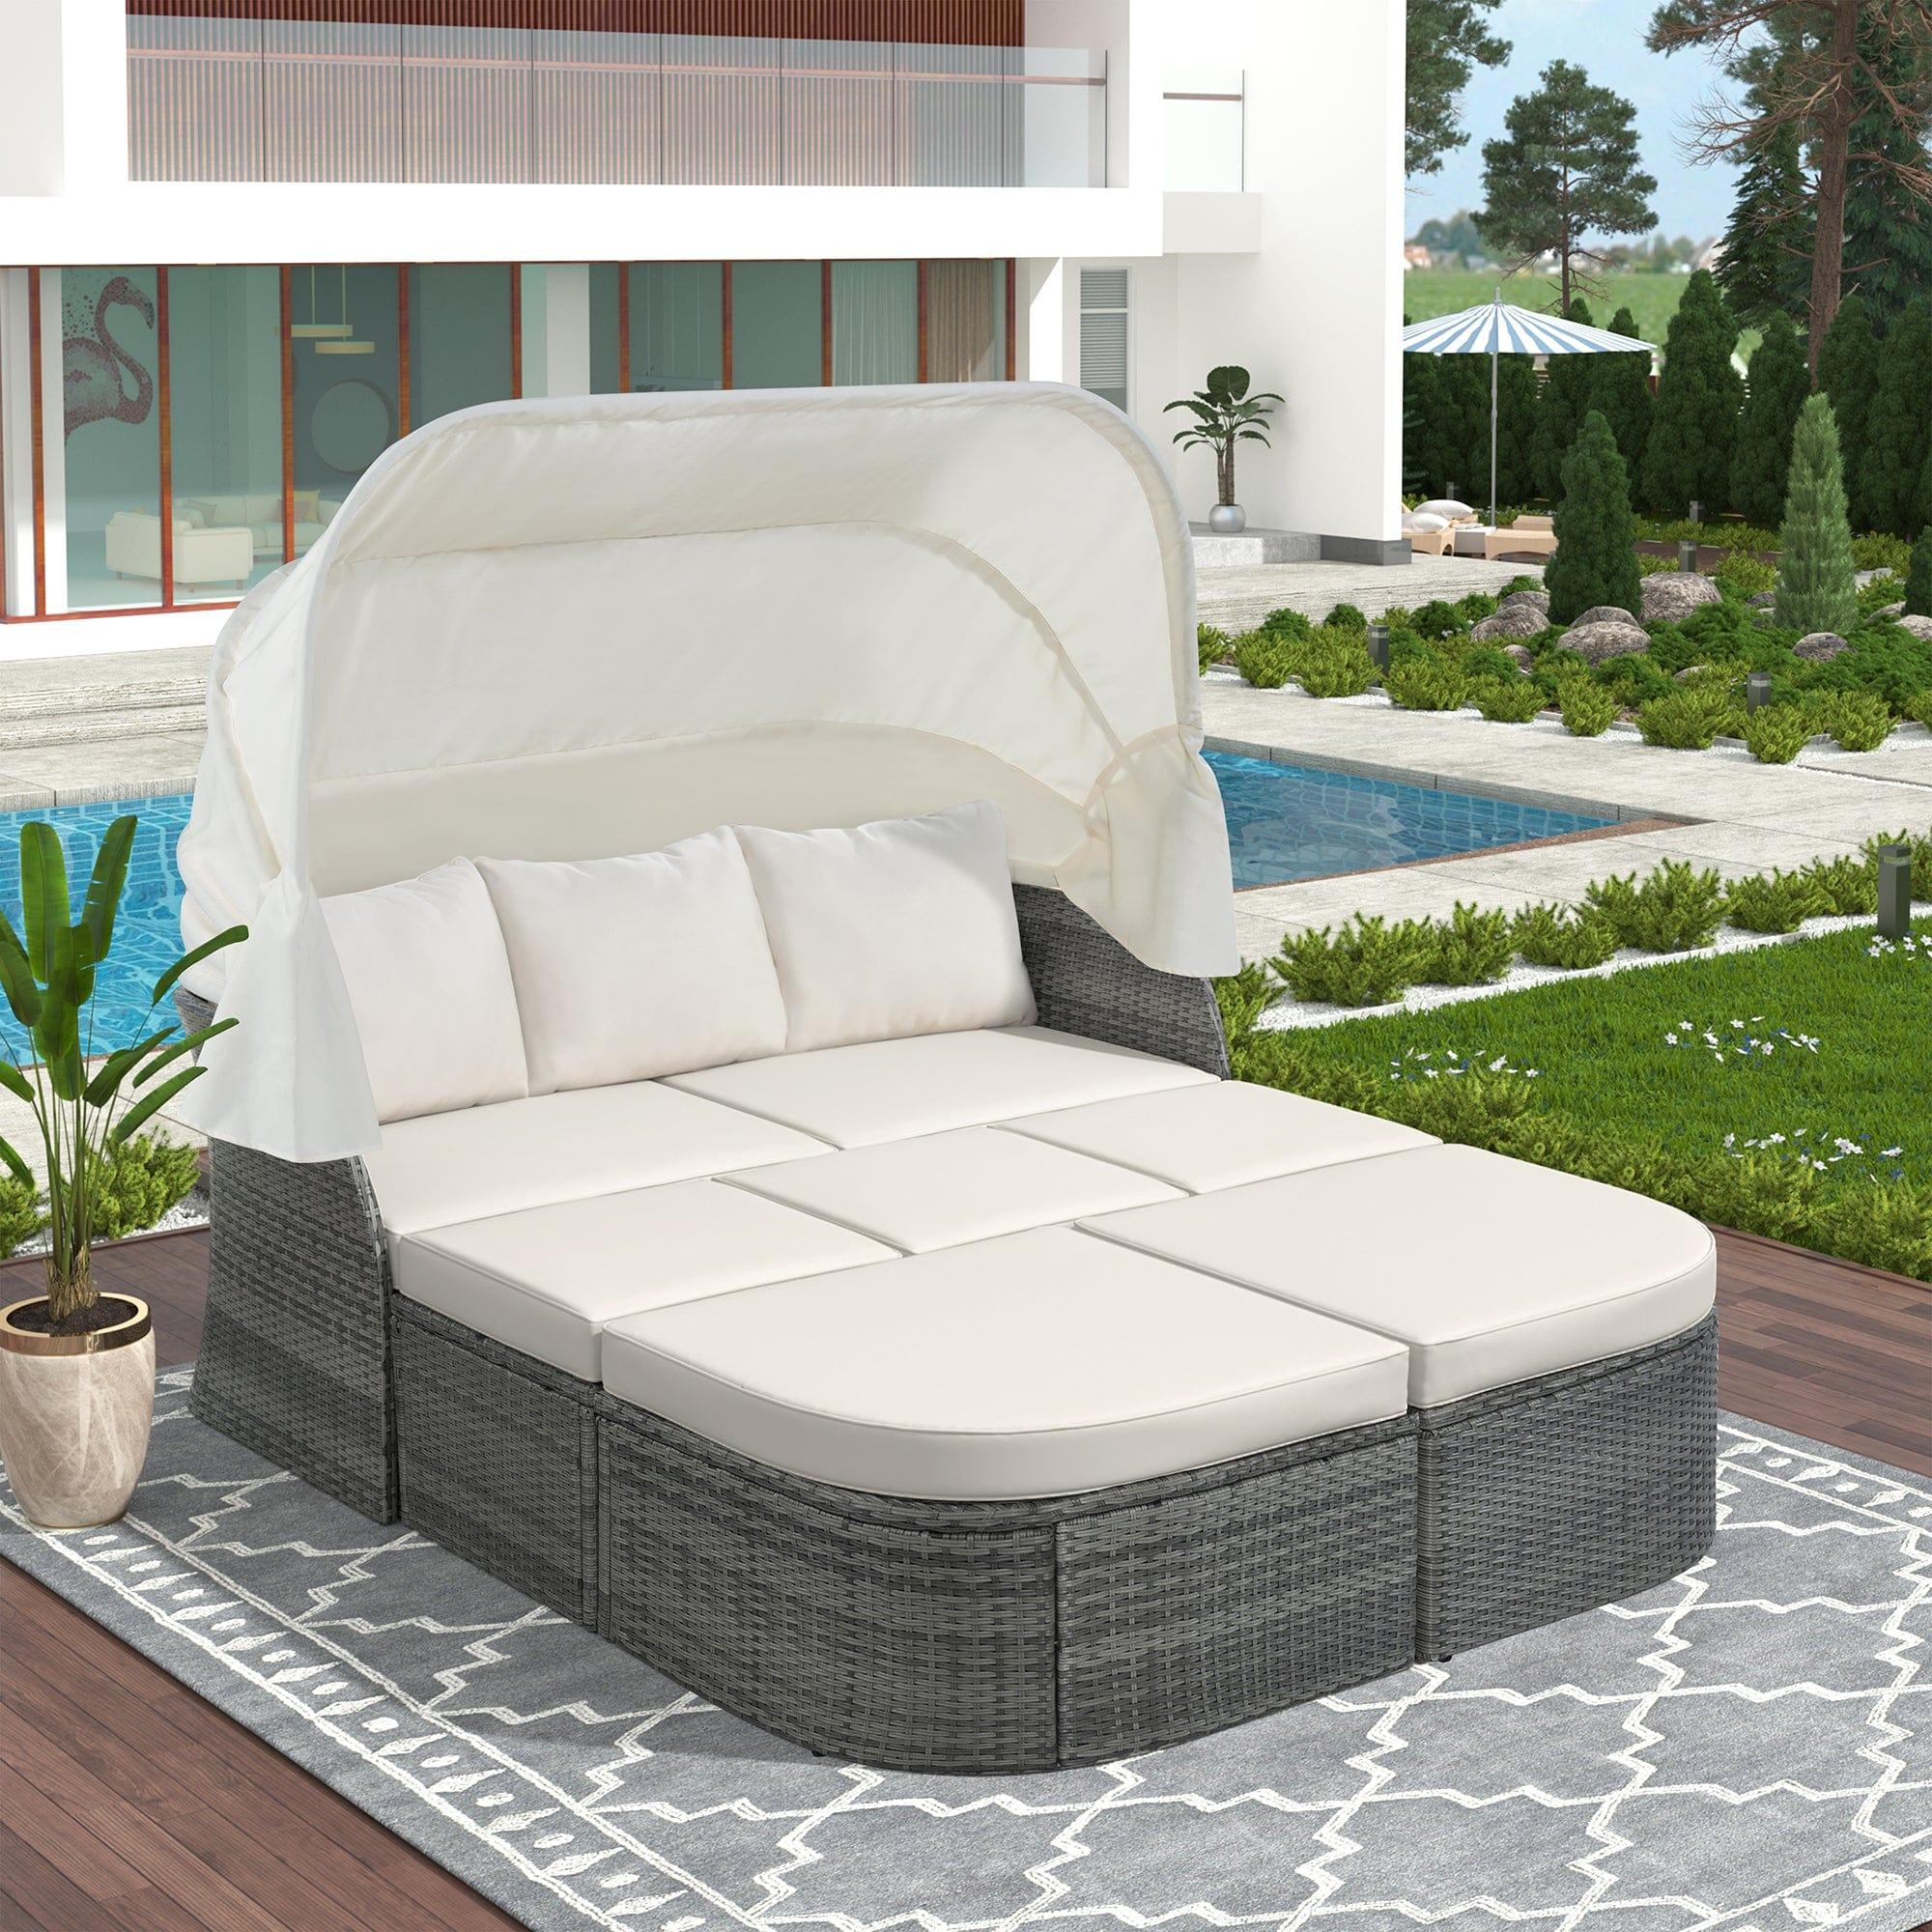 Shop U_STYLE Outdoor Patio Furniture Set Daybed Sunbed with Retractable Canopy Conversation Set Wicker Furniture Sofa Set Mademoiselle Home Decor